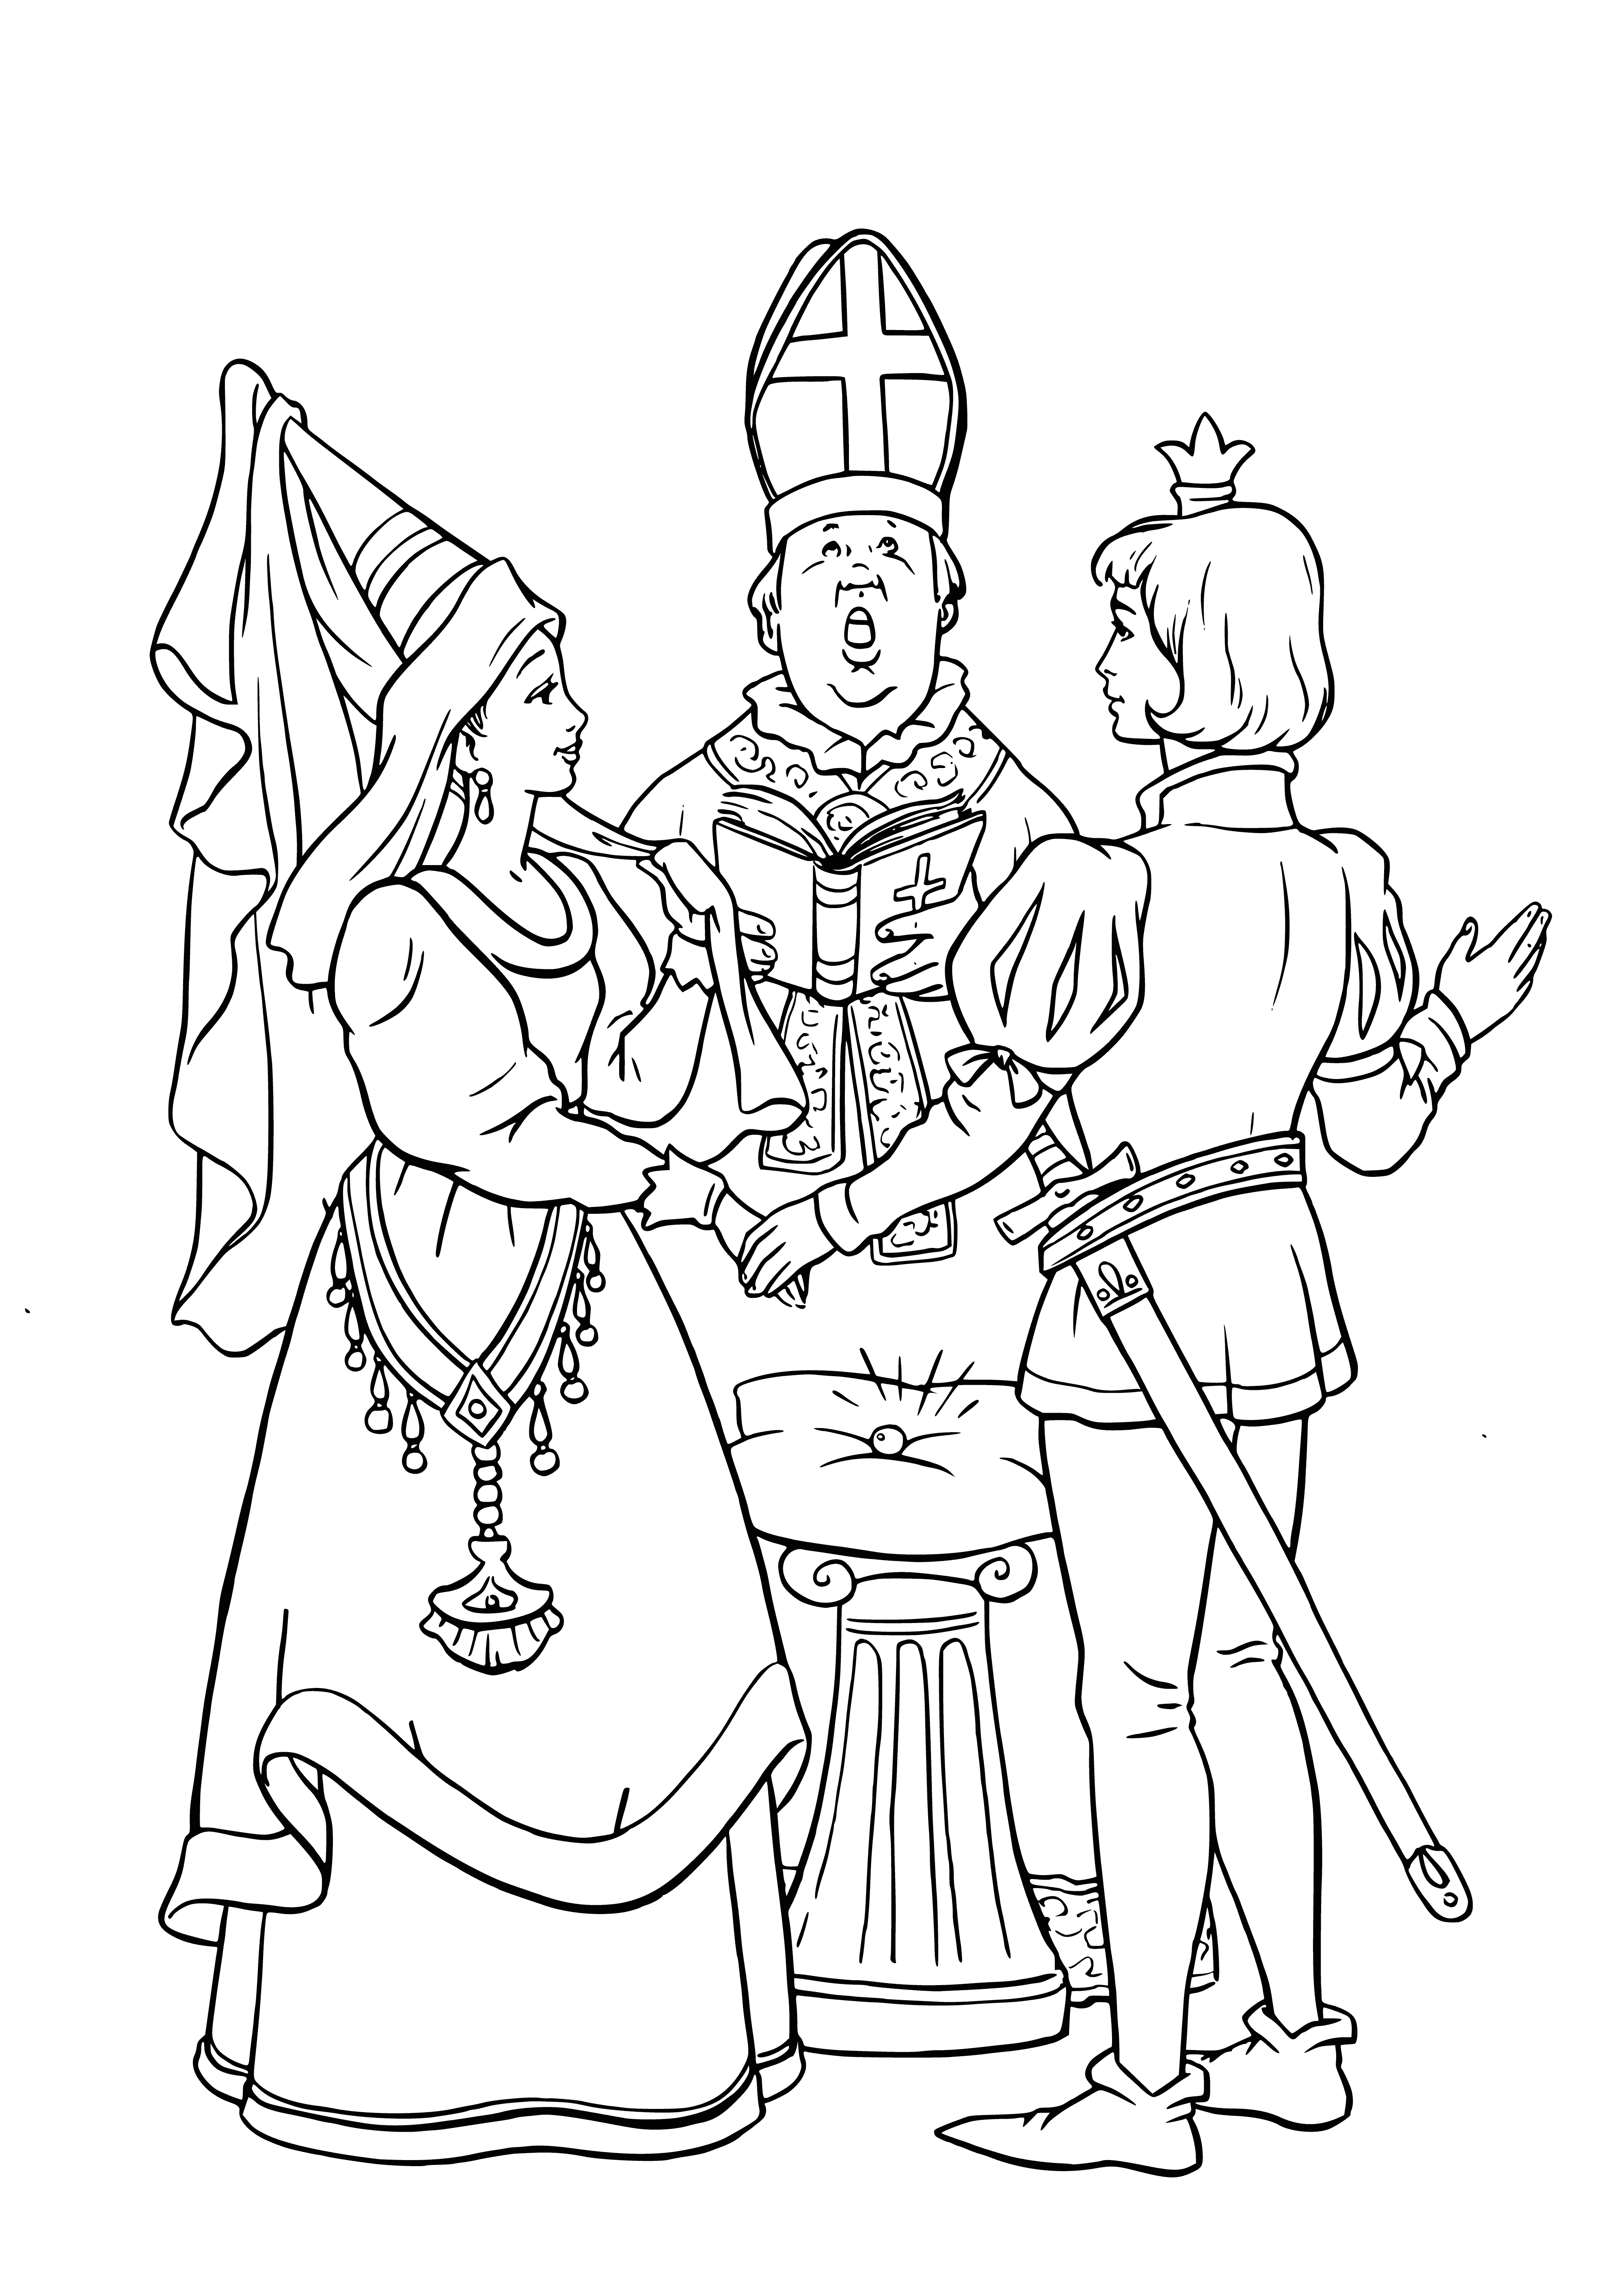 Wedding of the Prince and Prinzeccia coloring page